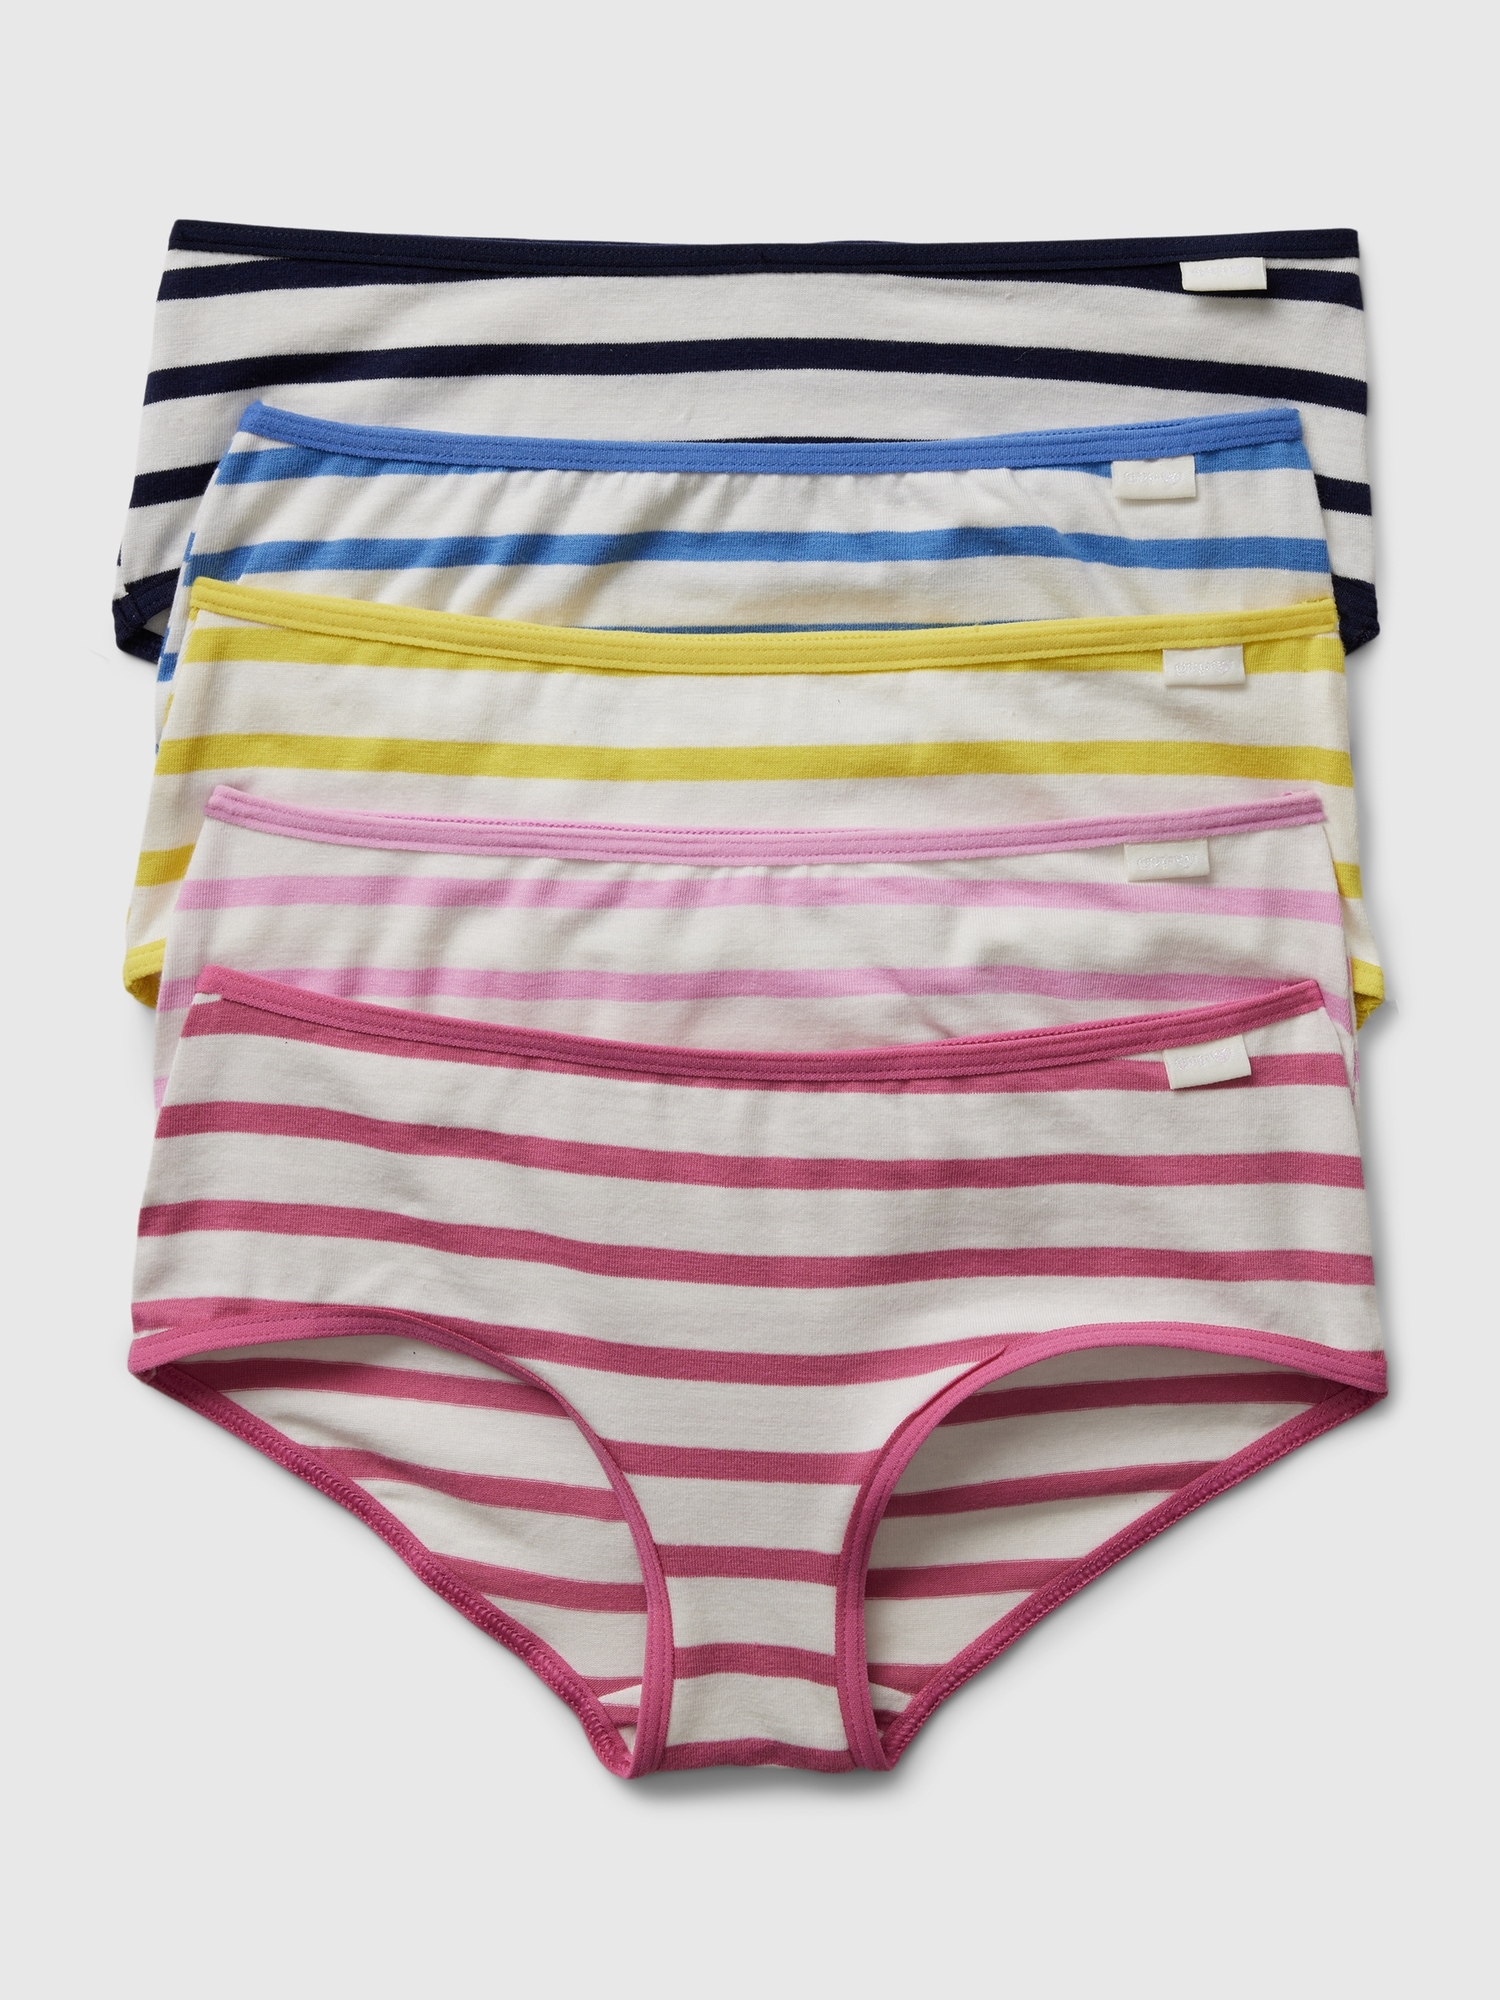 Buy Gap Stretch Cotton Hipster Knickers from the Gap online shop